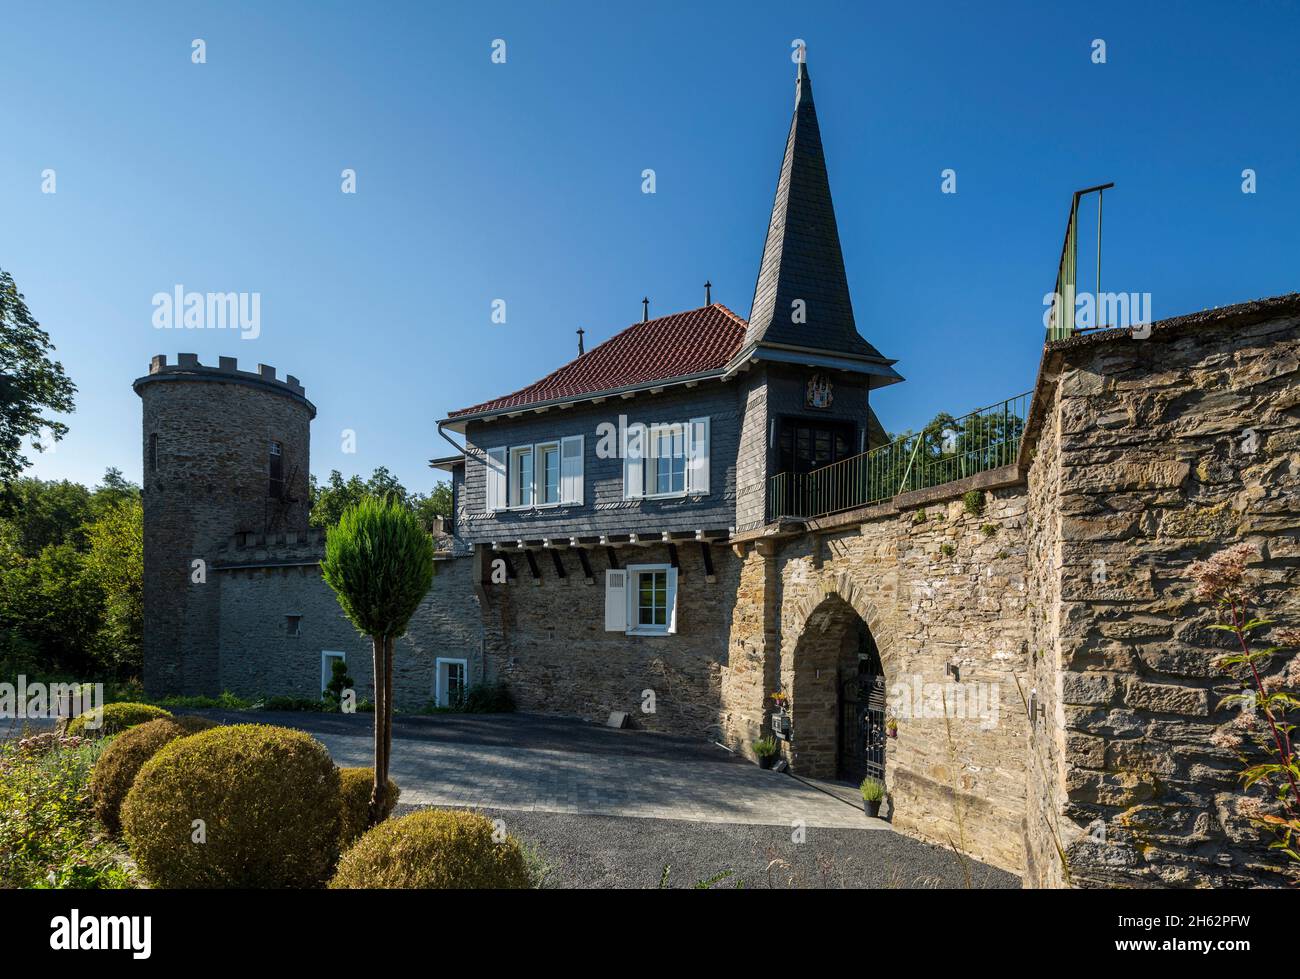 germany,wuelfrath,wuelfrath-aprath,bergisches land,niederbergisches land,niederberg,rhineland,north rhine-westphalia,remains of castle aprath,formerly knight's seat,building complex with defense tower and gatehouse Stock Photo